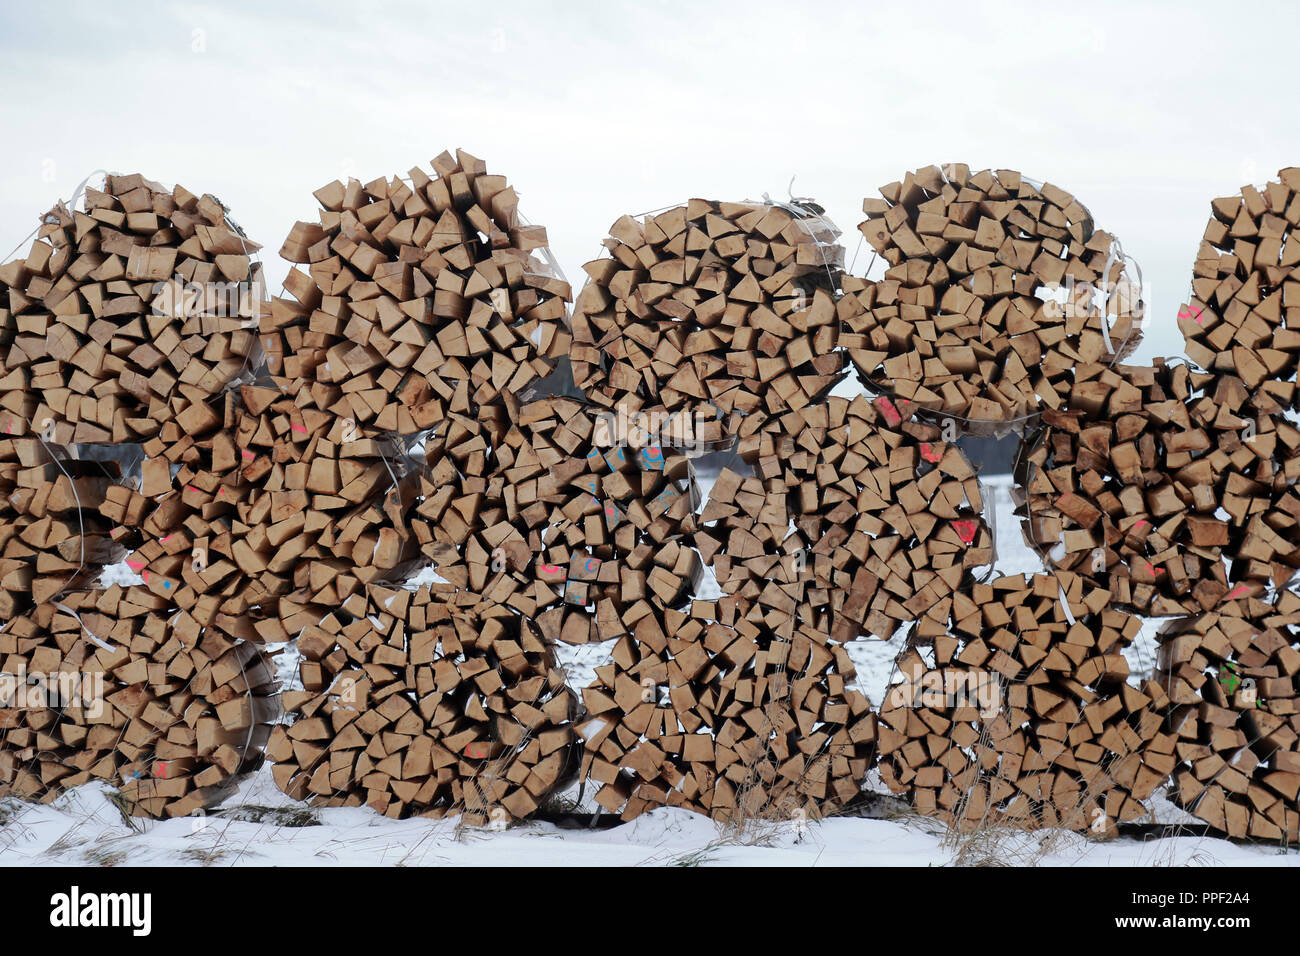 Firewood pile in the snow, Heche, Bavaria, Germany Stock Photo